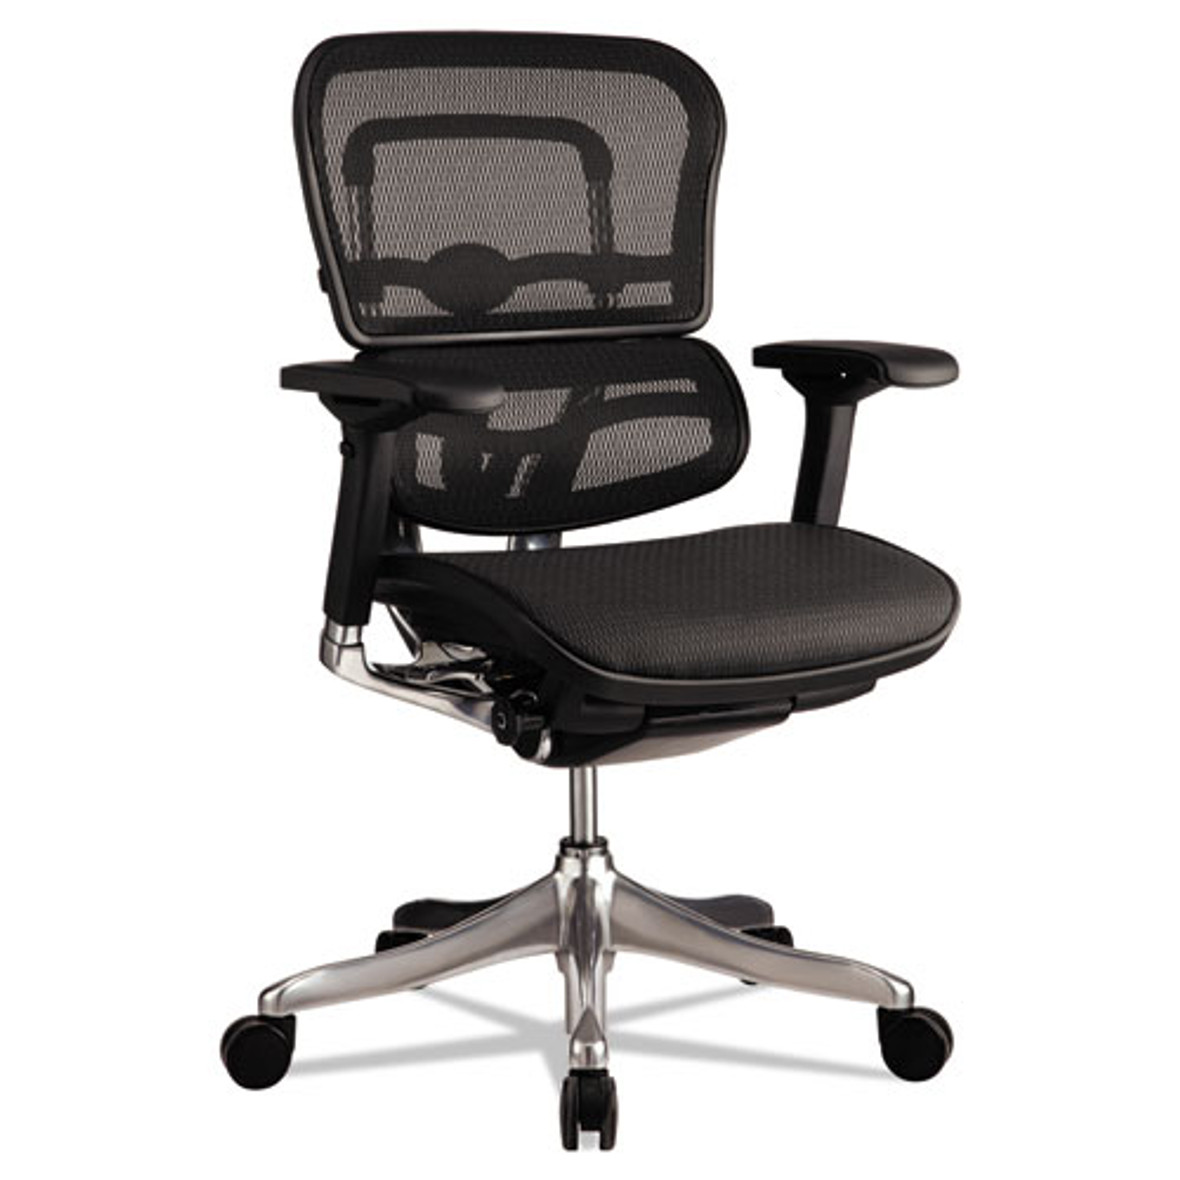 Eurotech Ergohuman Elite Mid-back Mesh Chair, Supports Up to 250 lb, 18.11" to 21.65" Seat Height, Black, 1 Each/Carton